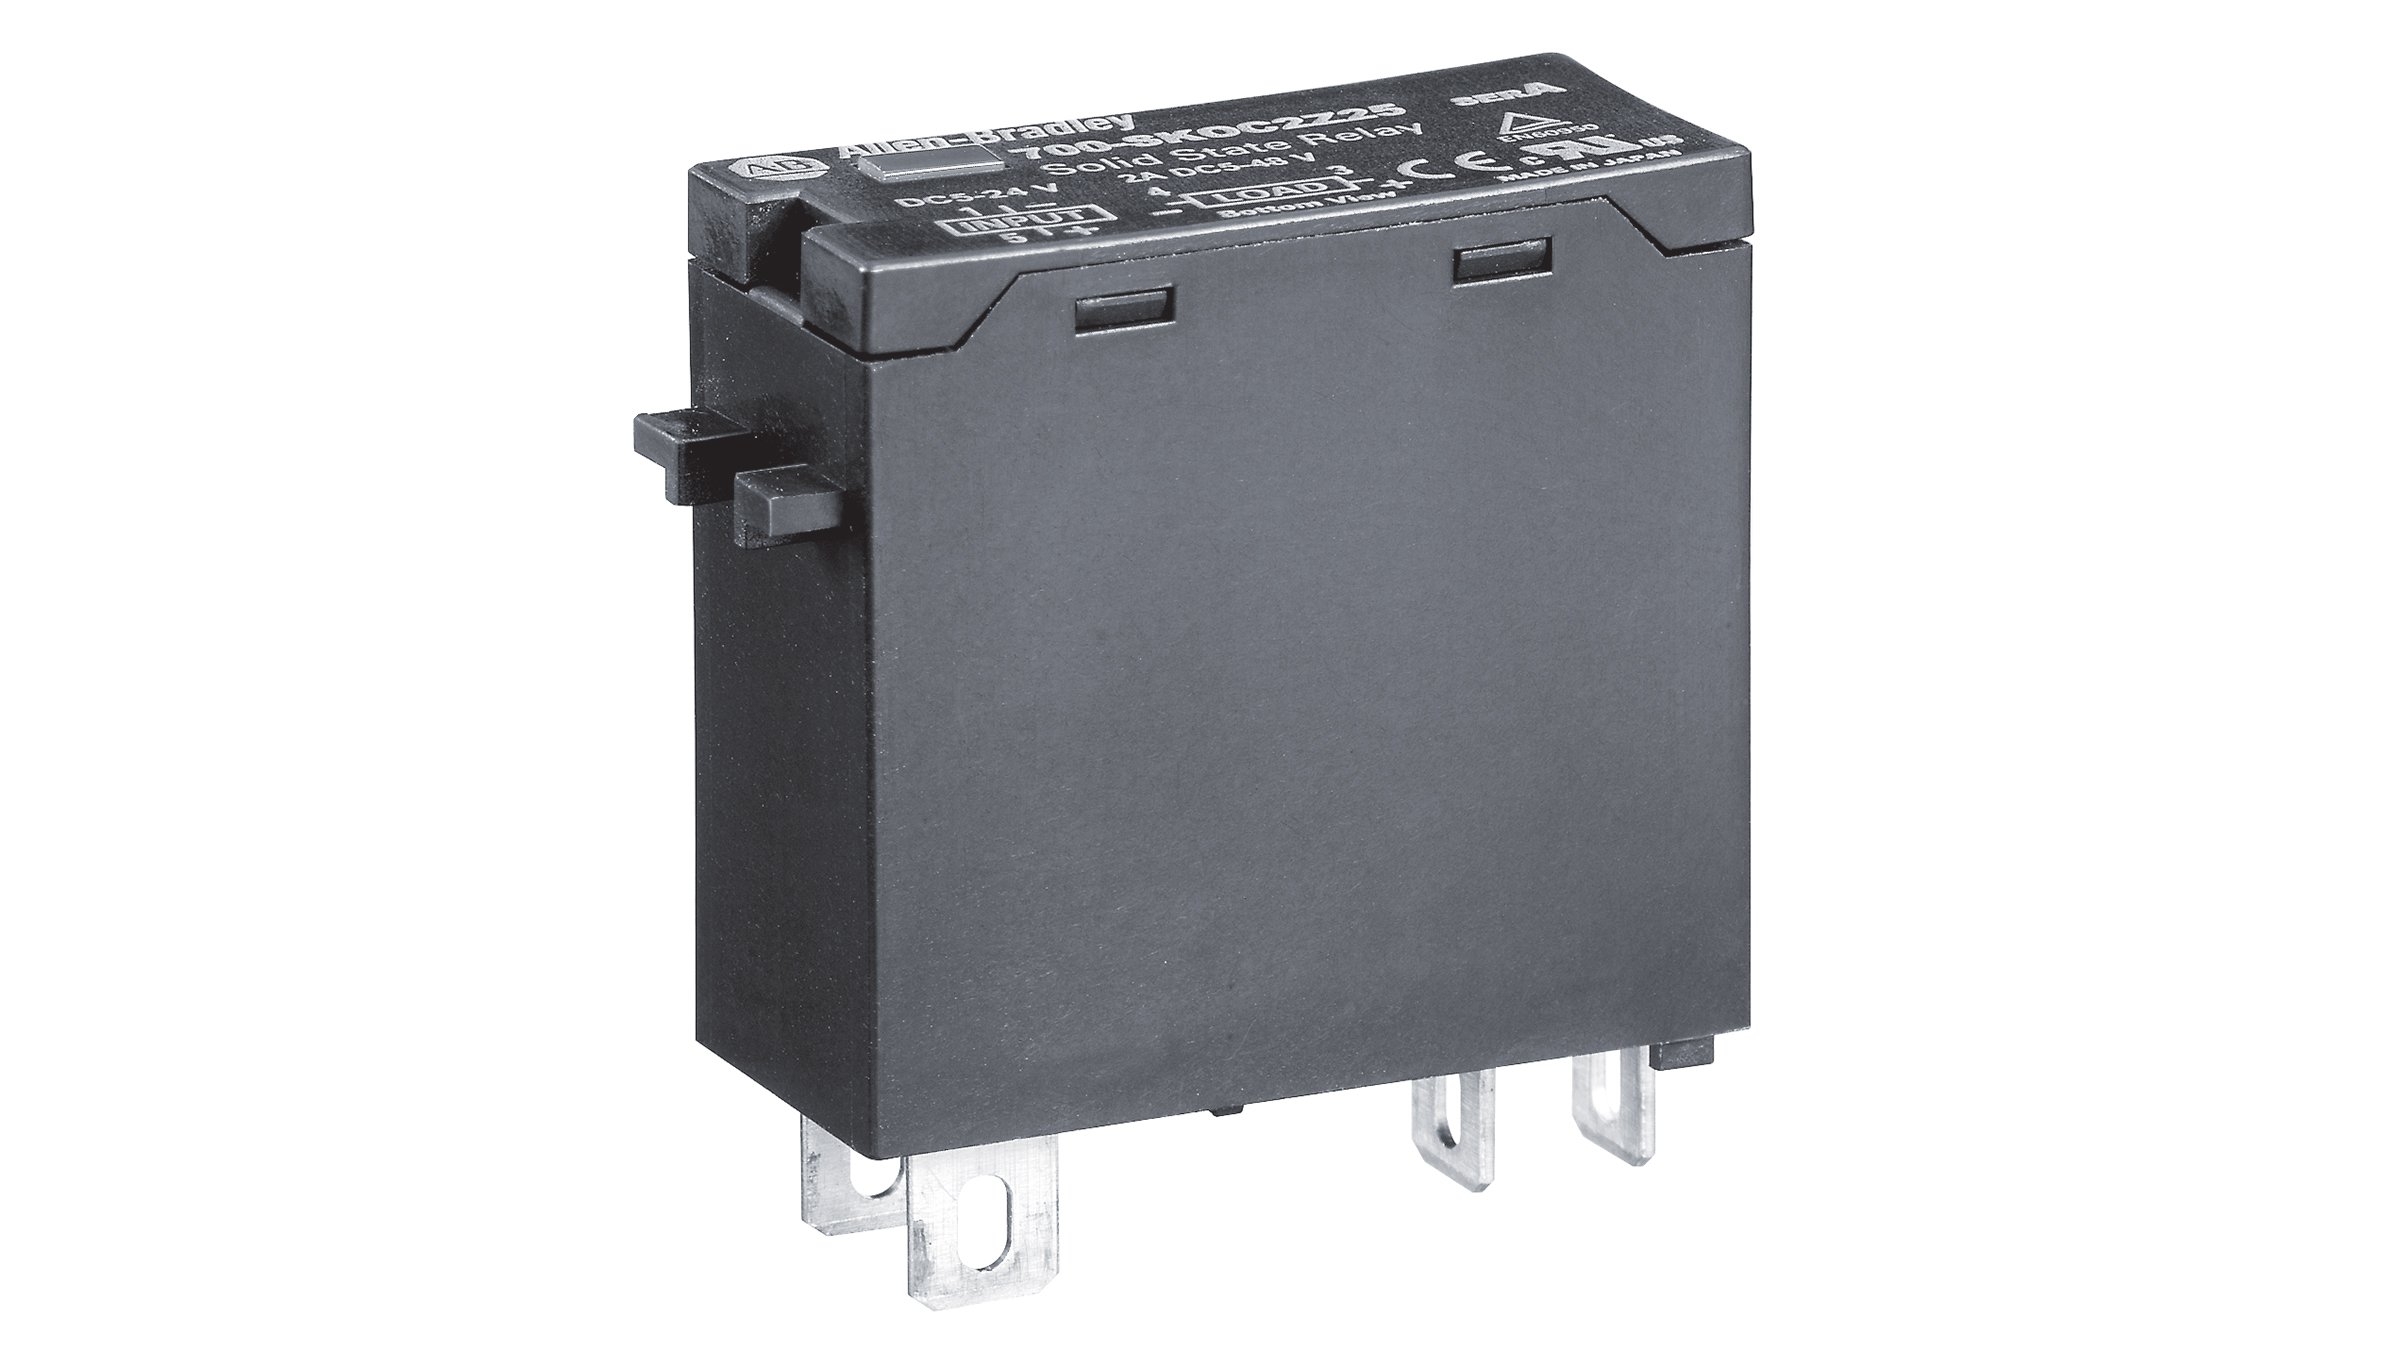 Allen-Bradley Bulletin 700-SK Slim Line Relays are solid-state relays compatible with HN121 or HN122 sockets